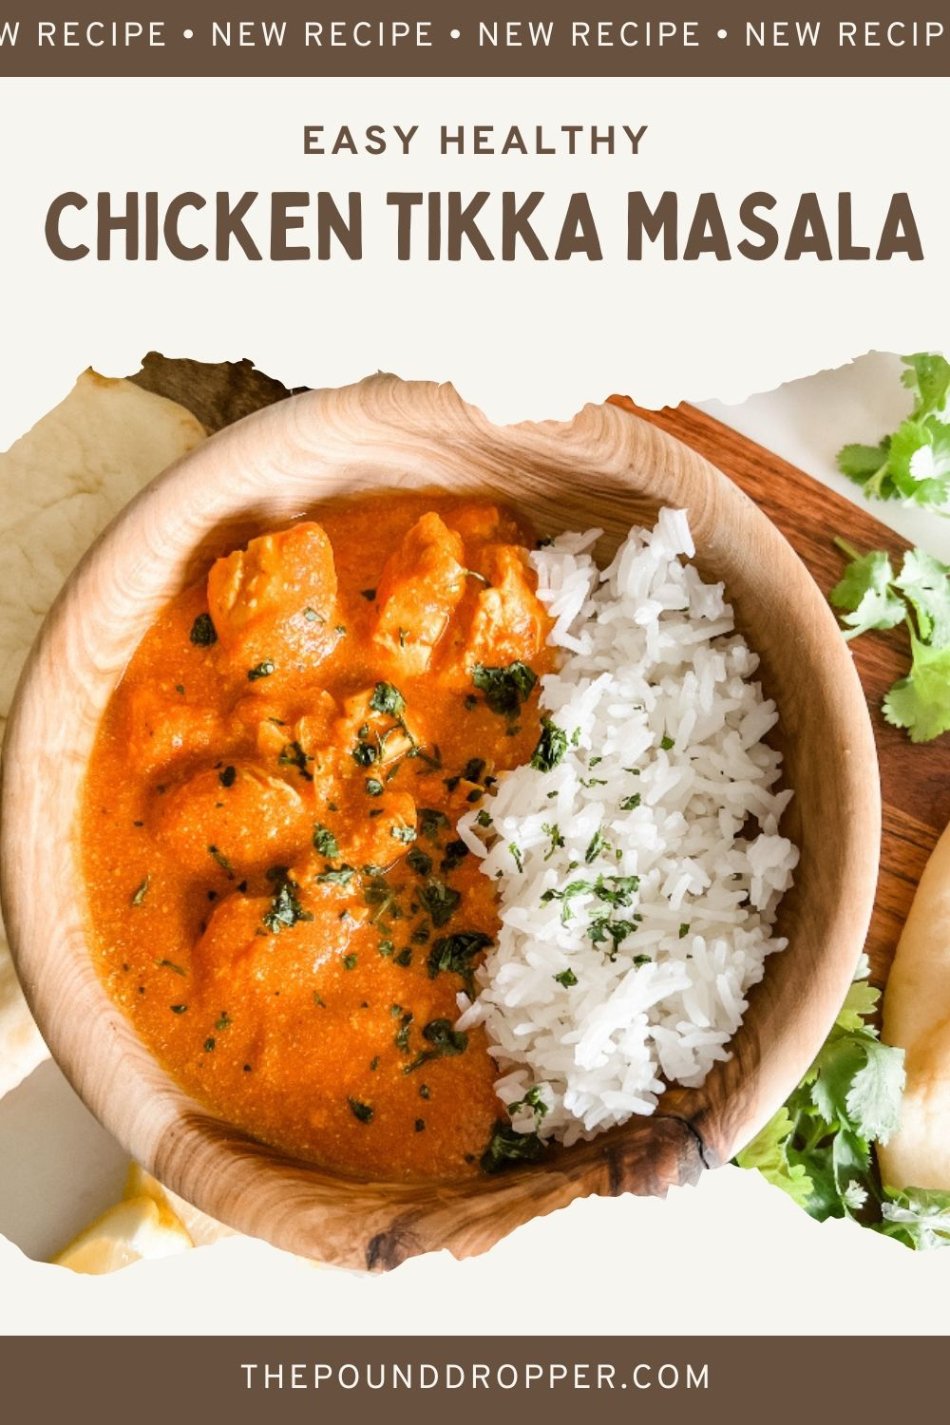 This Easy Healthy Chicken Tikka Masala features pieces of boneless chicken marinated in spices, yogurt and all wrapped up in a creamy, spicy tomato sauce! This is easy, creamy, and delicious-making it a perfect weeknight meal- and better than any take-out! via @pounddropper